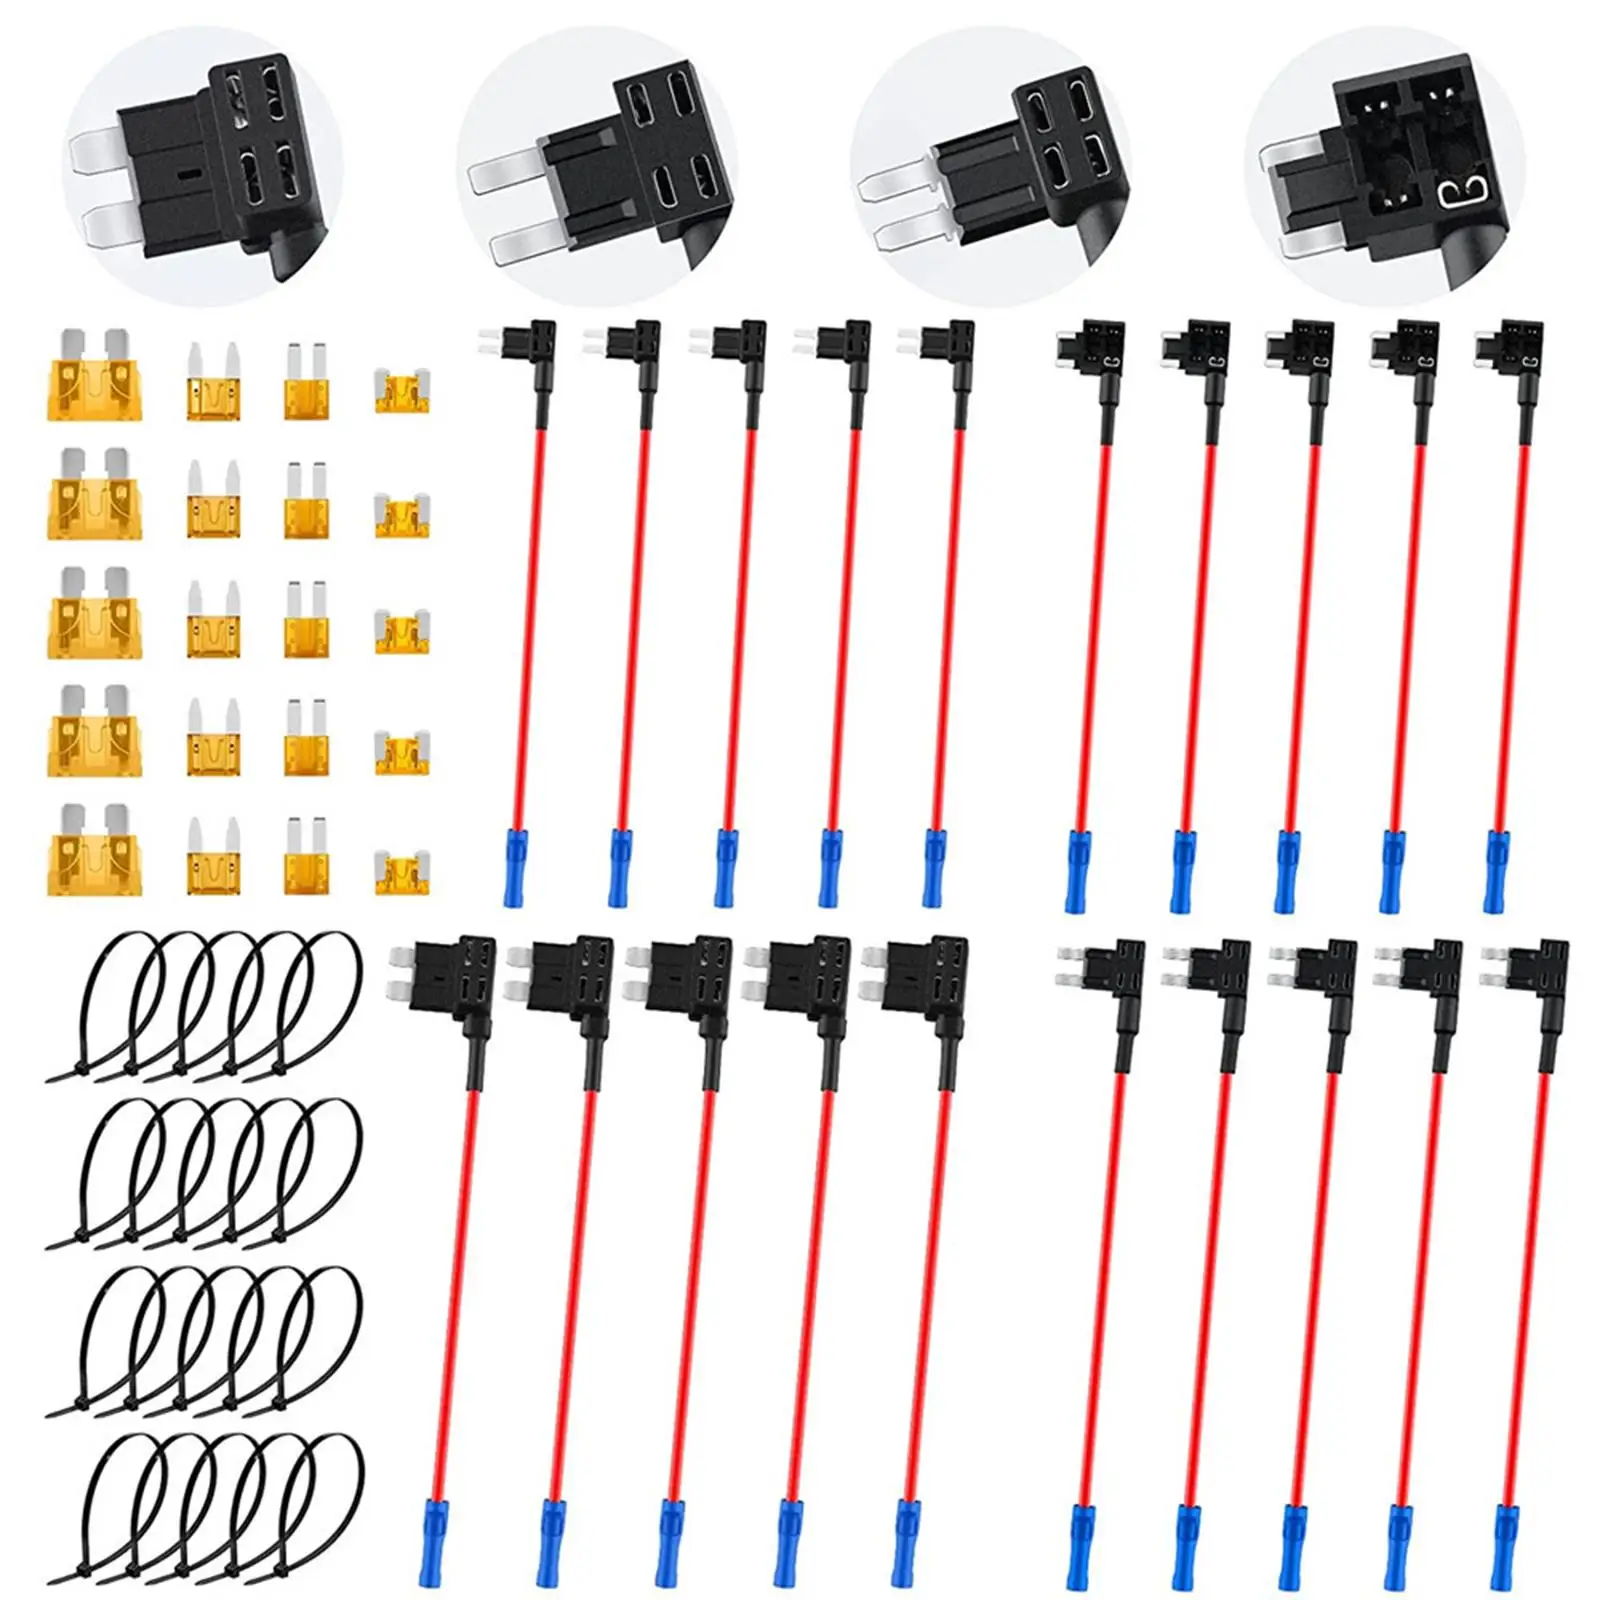 20 Pieces Car Add A Circuit Fuse Tap Adapter Set Dual Slot Fuse Holders Accessories Professional for Adding LED Light Strip